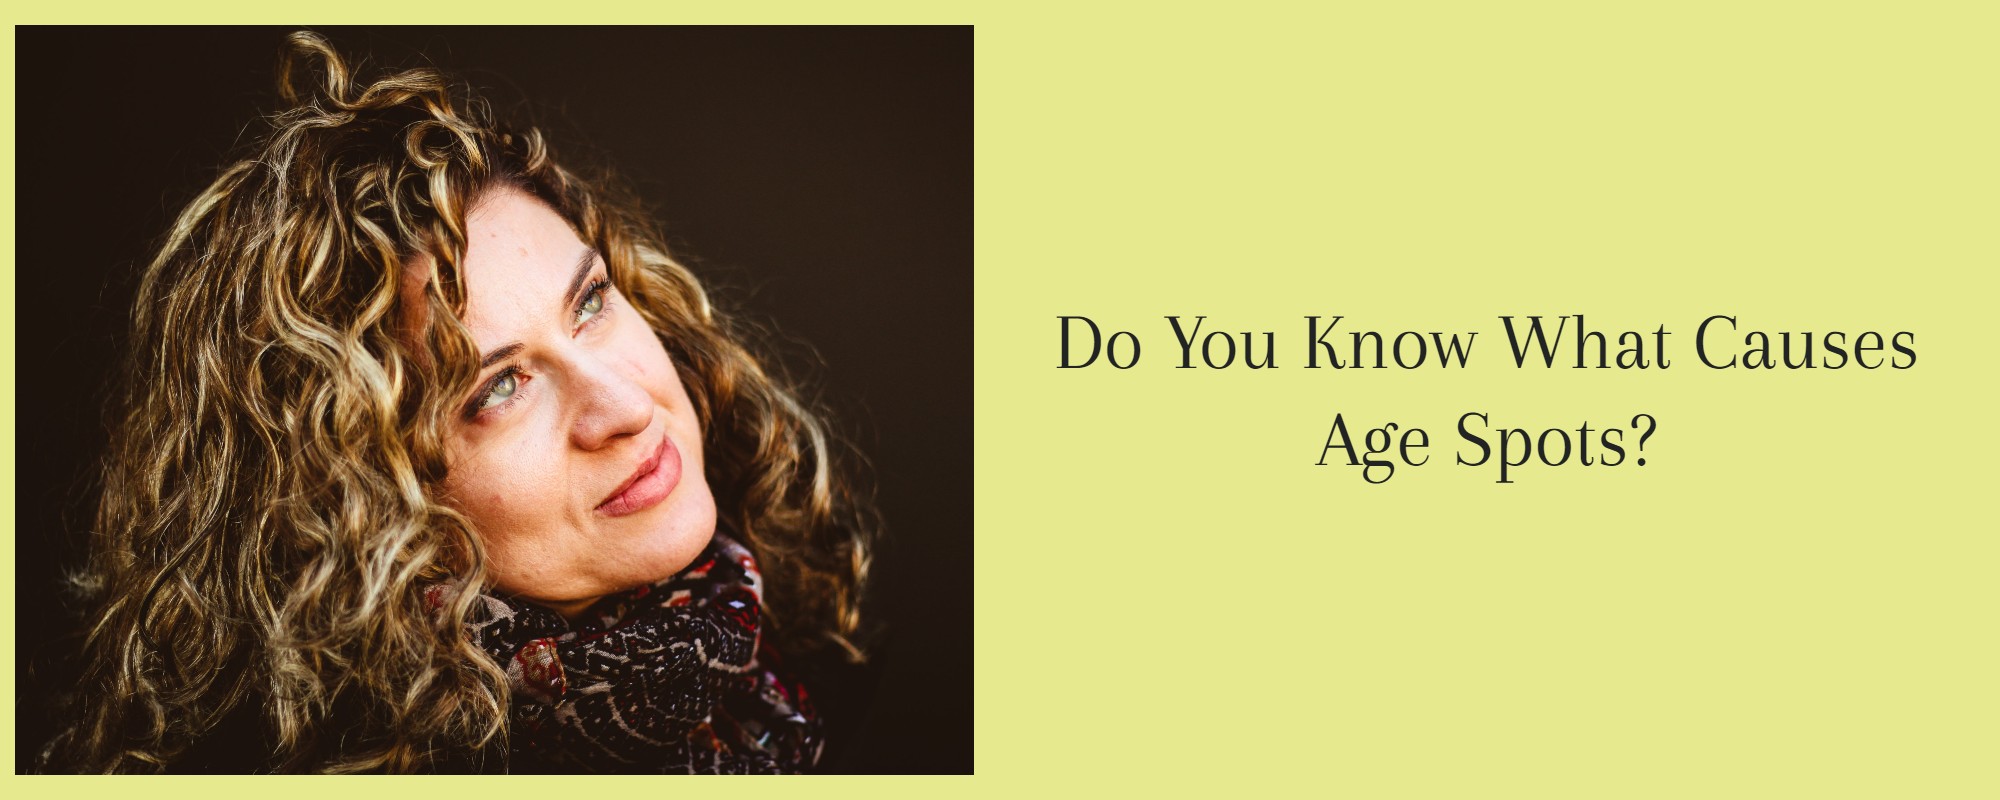 Do You Know What Causes Age Spots? - 1